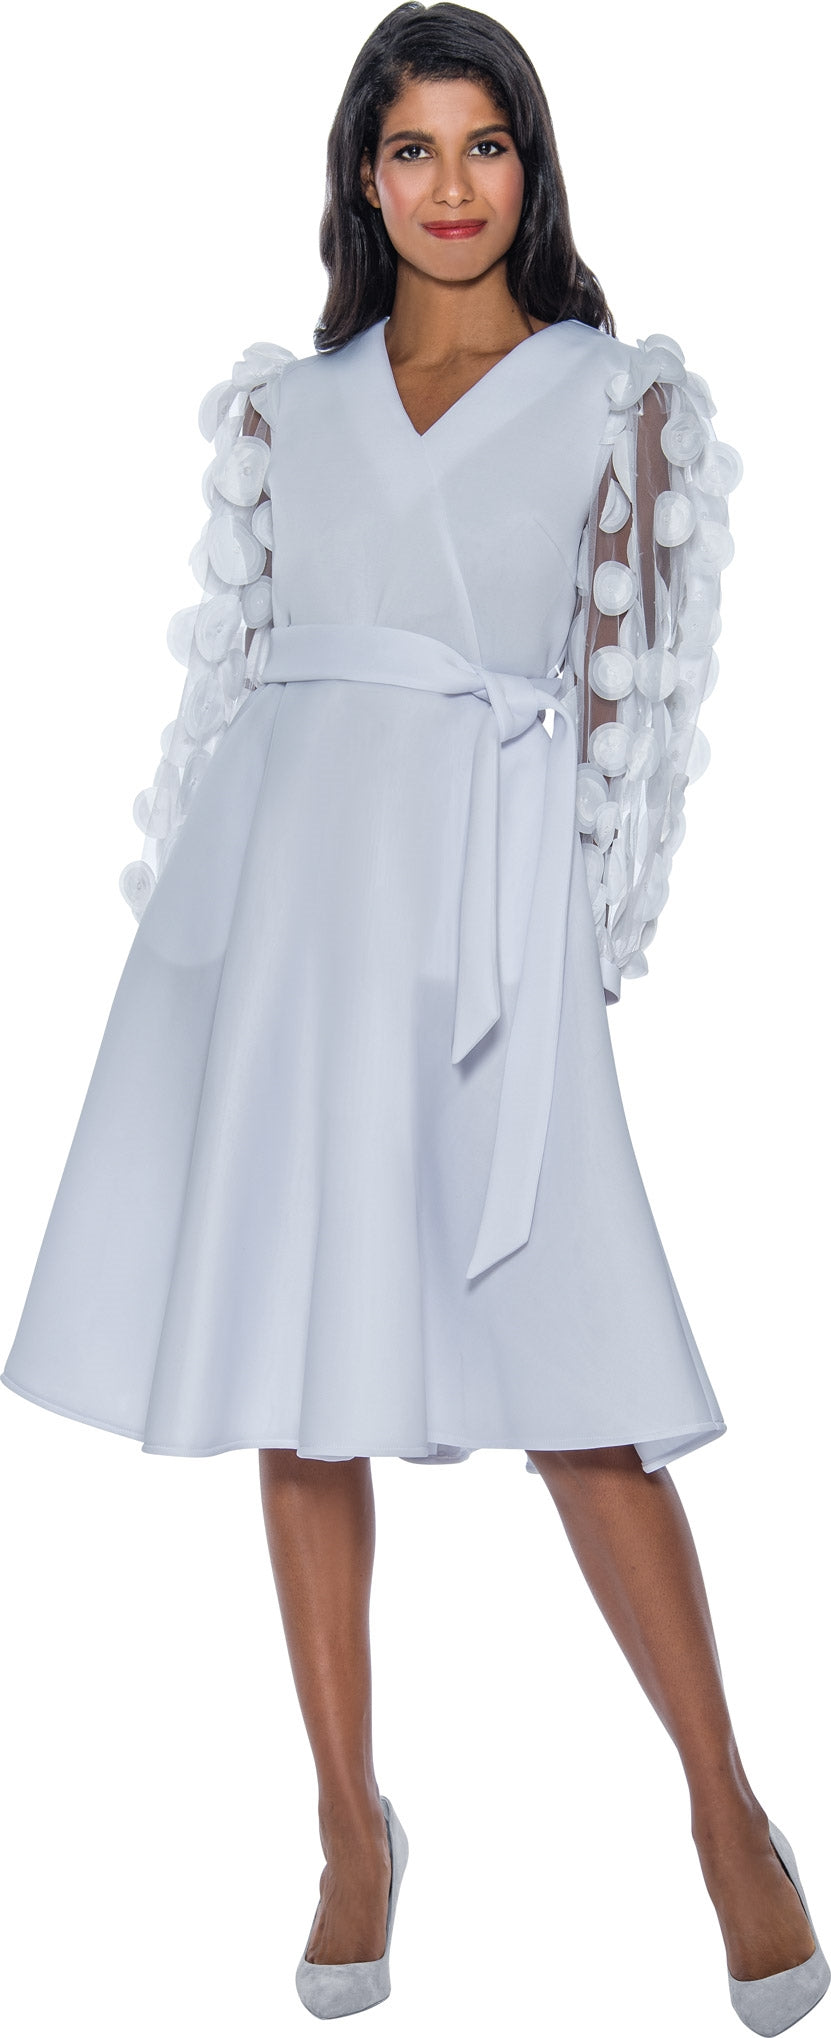 Church Dress By Nubiano 921-White - Church Suits For Less